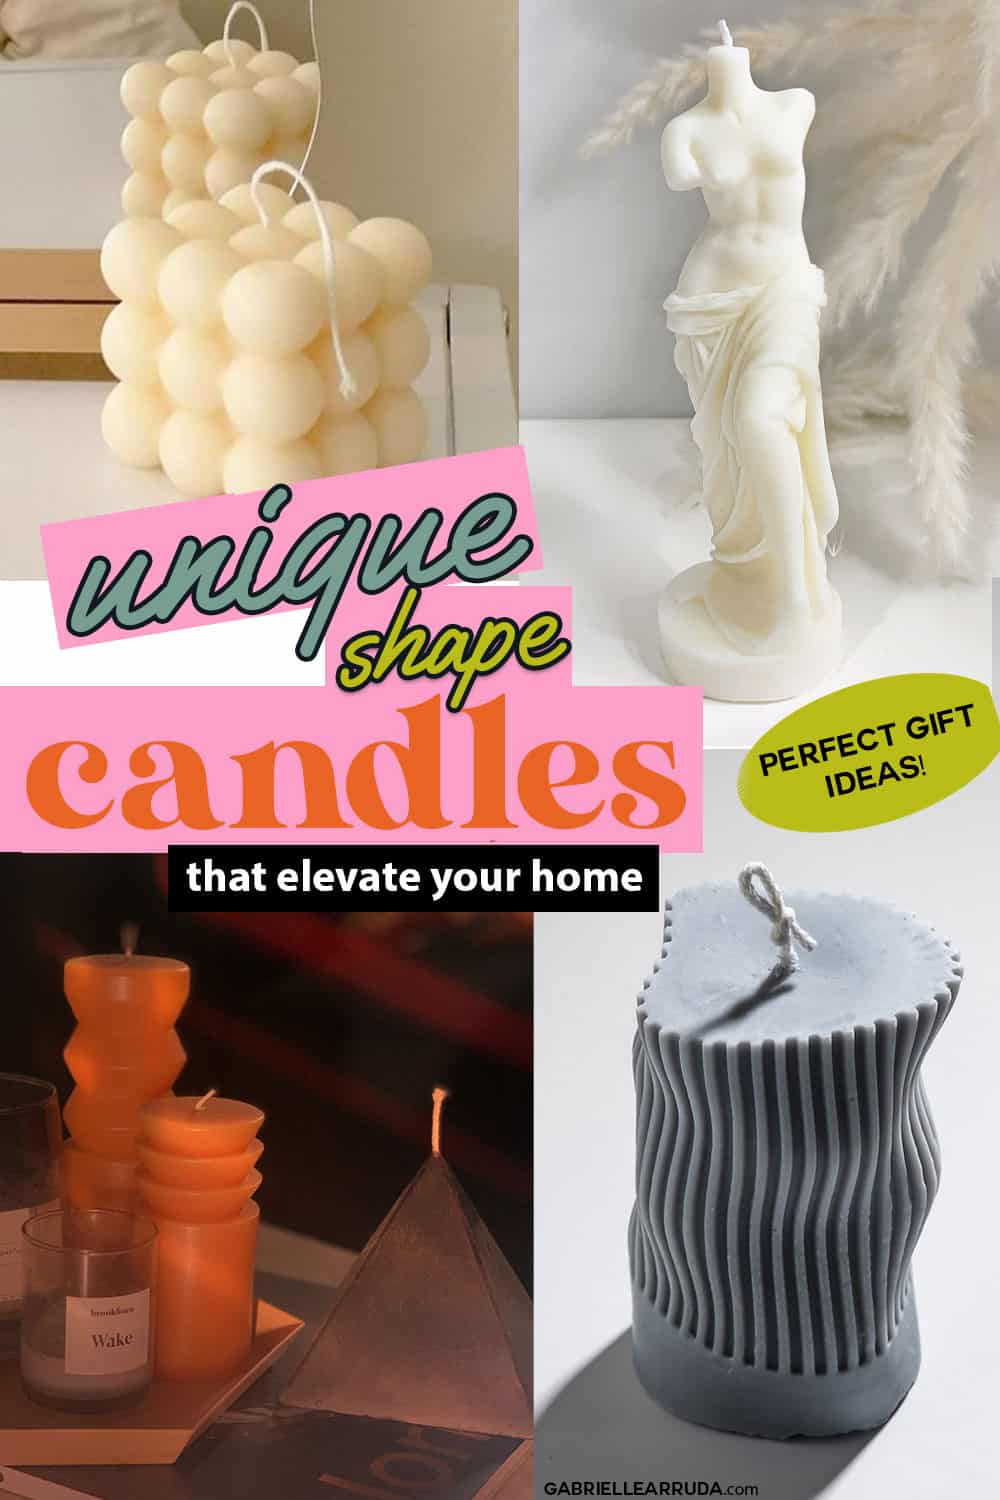 cool unique candles that will elevate your home